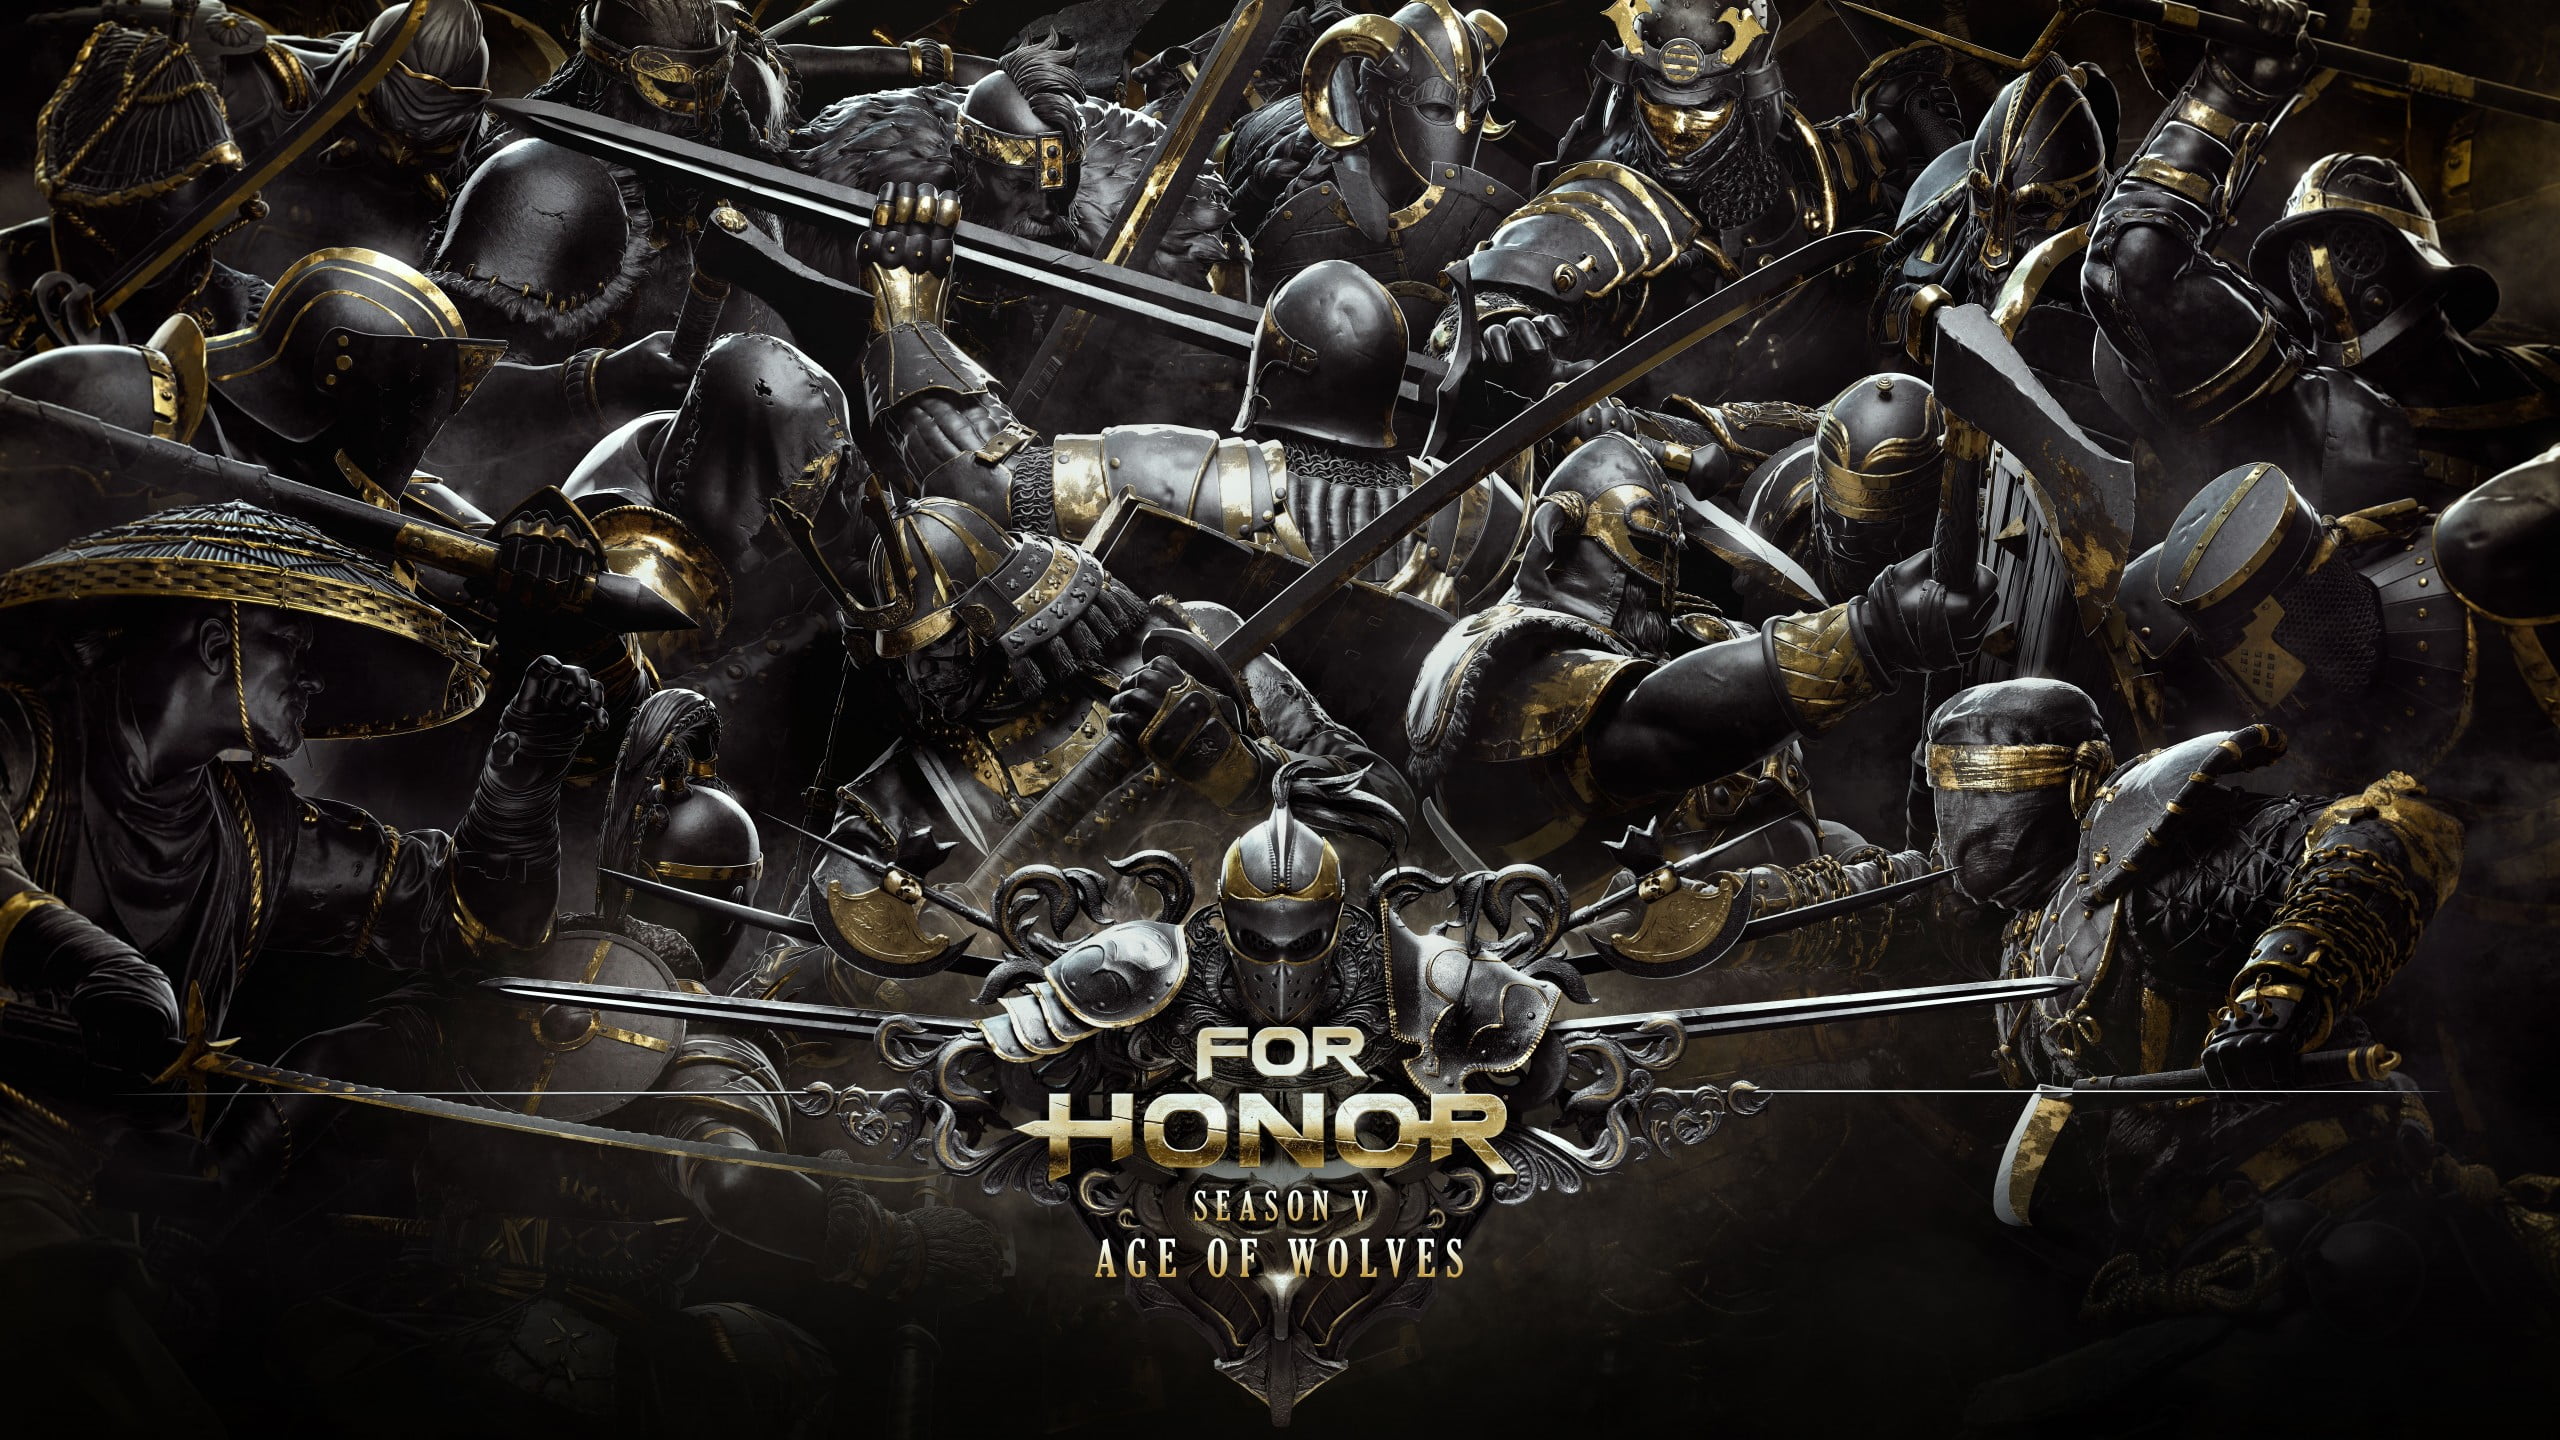 For honor Season V Age of Wolves poster, video games, For Honor, knight